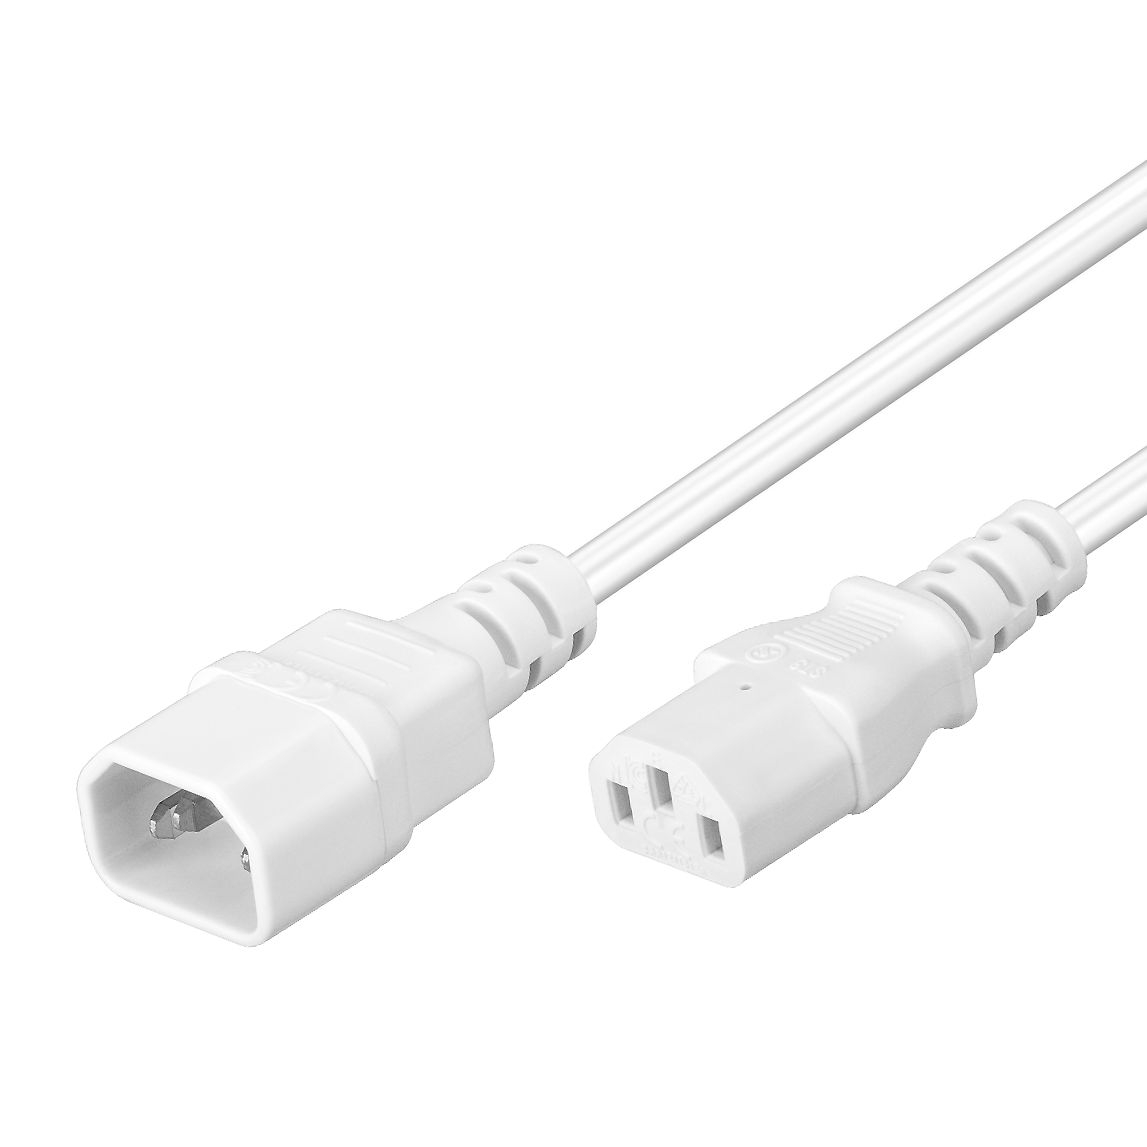 Power cord extension cable C13 to C14 white 2m